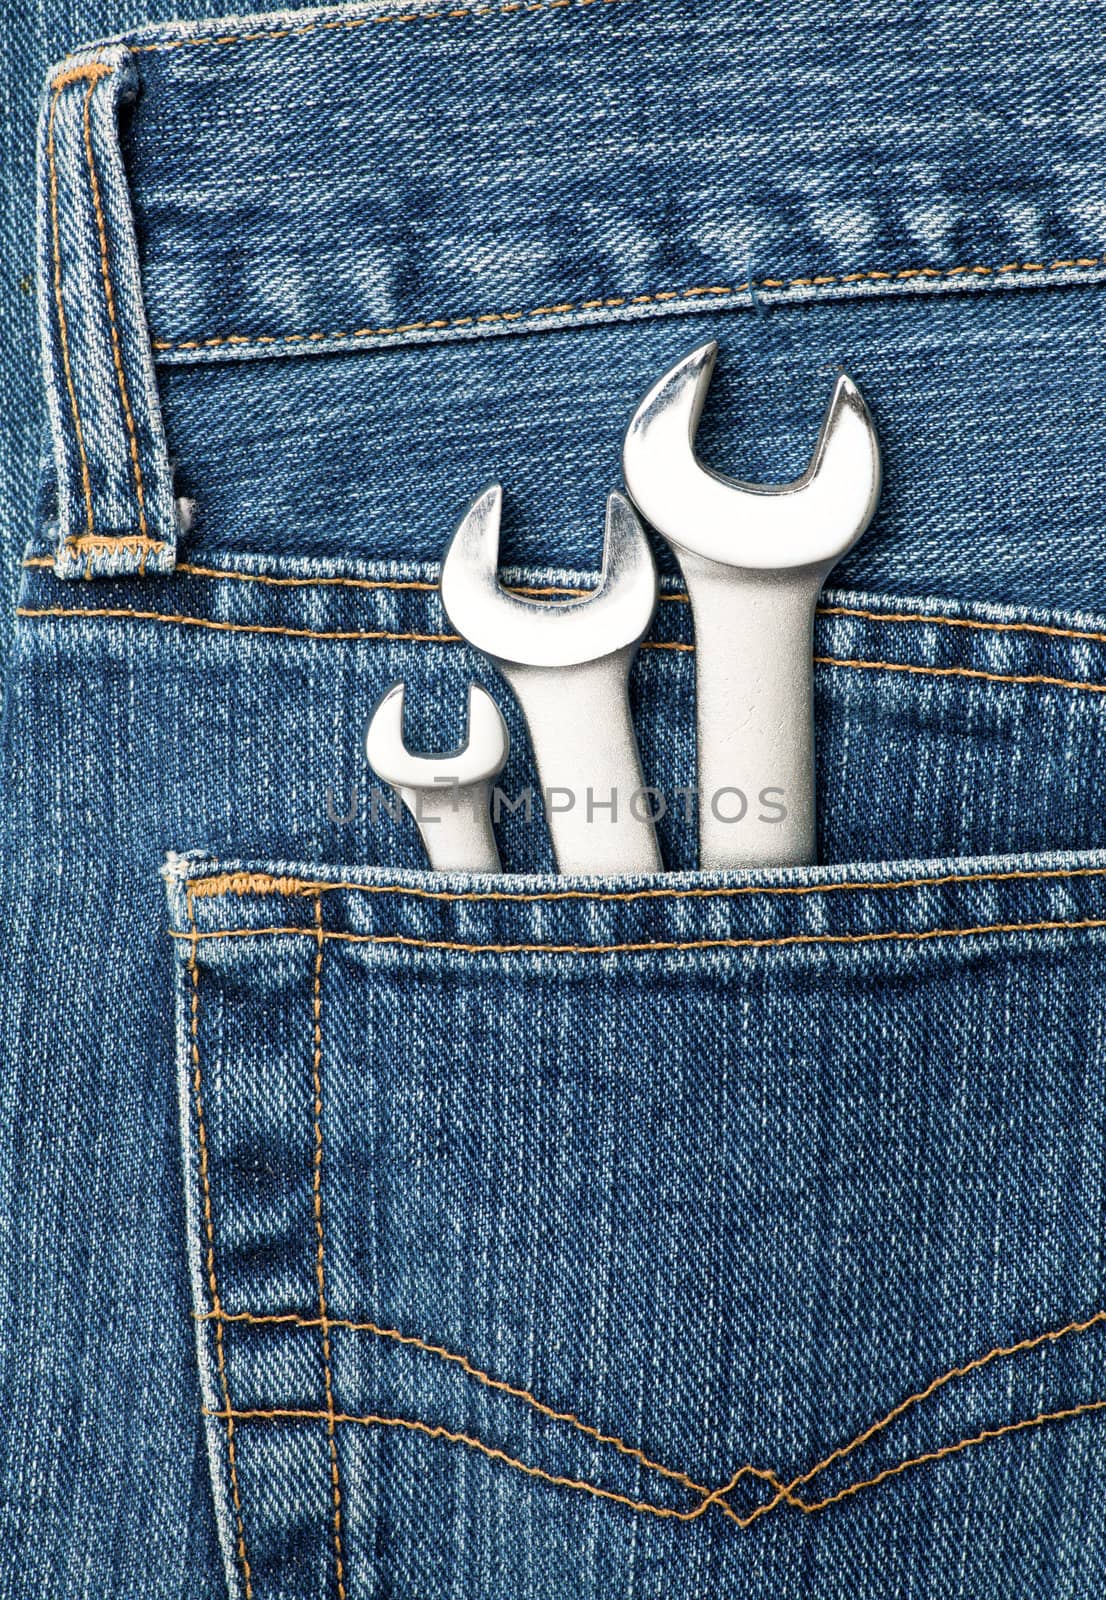 Lug wrenches in a pocket by naumoid